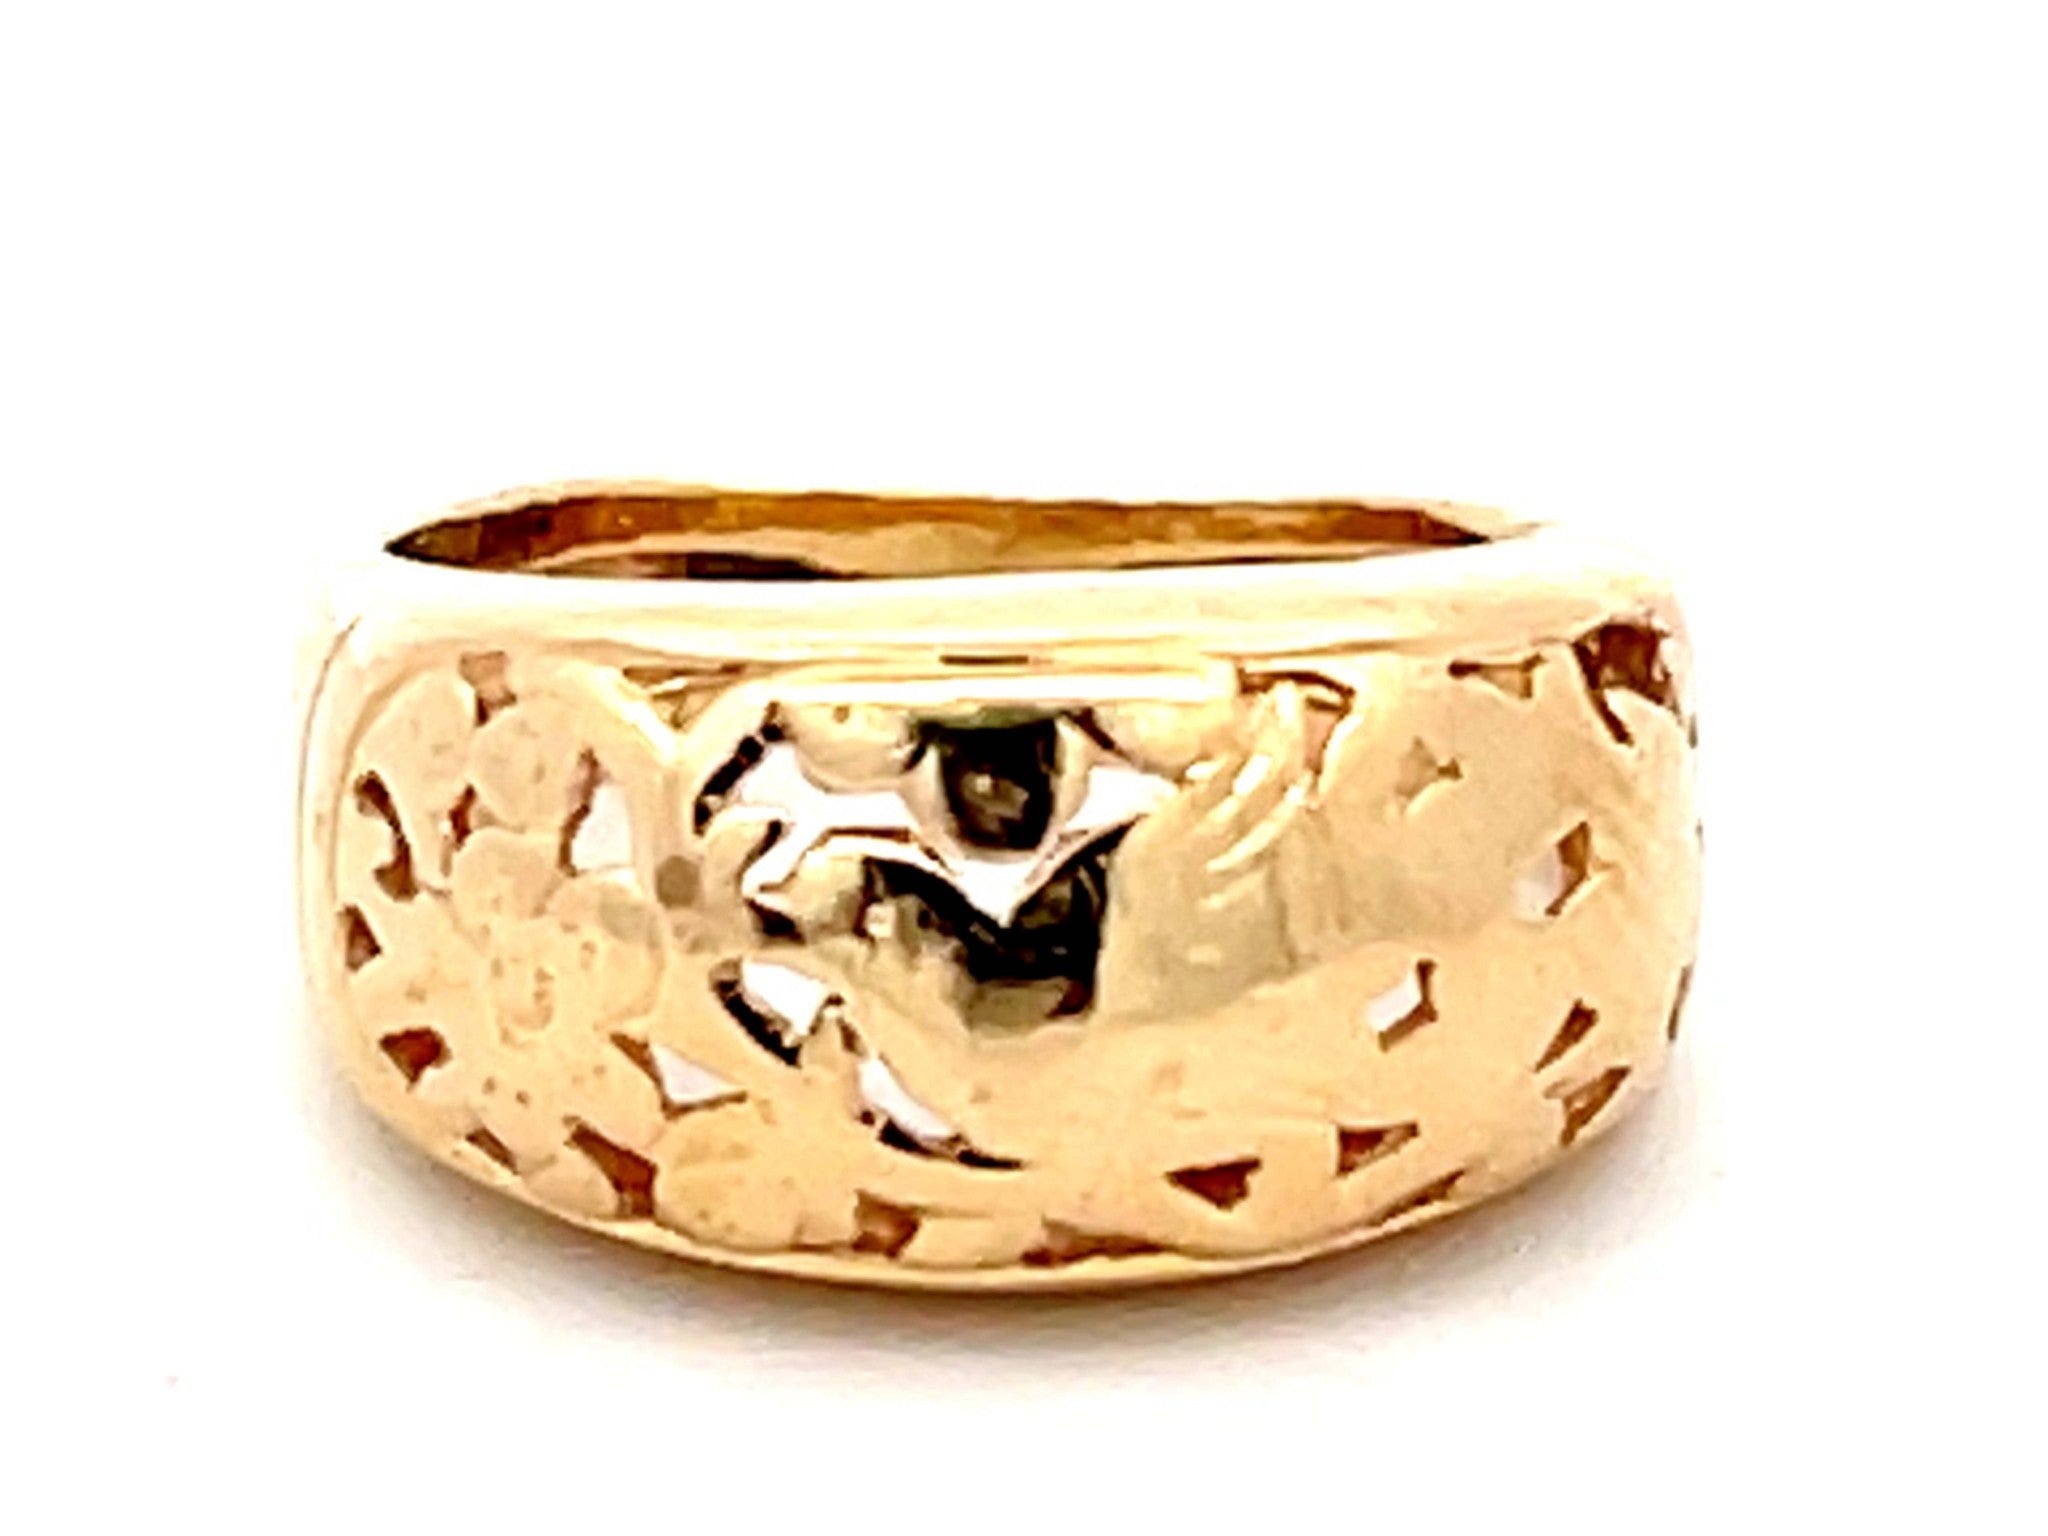 Mings Bird on a Plum Gold Cutout Dome Band Ring in 14k